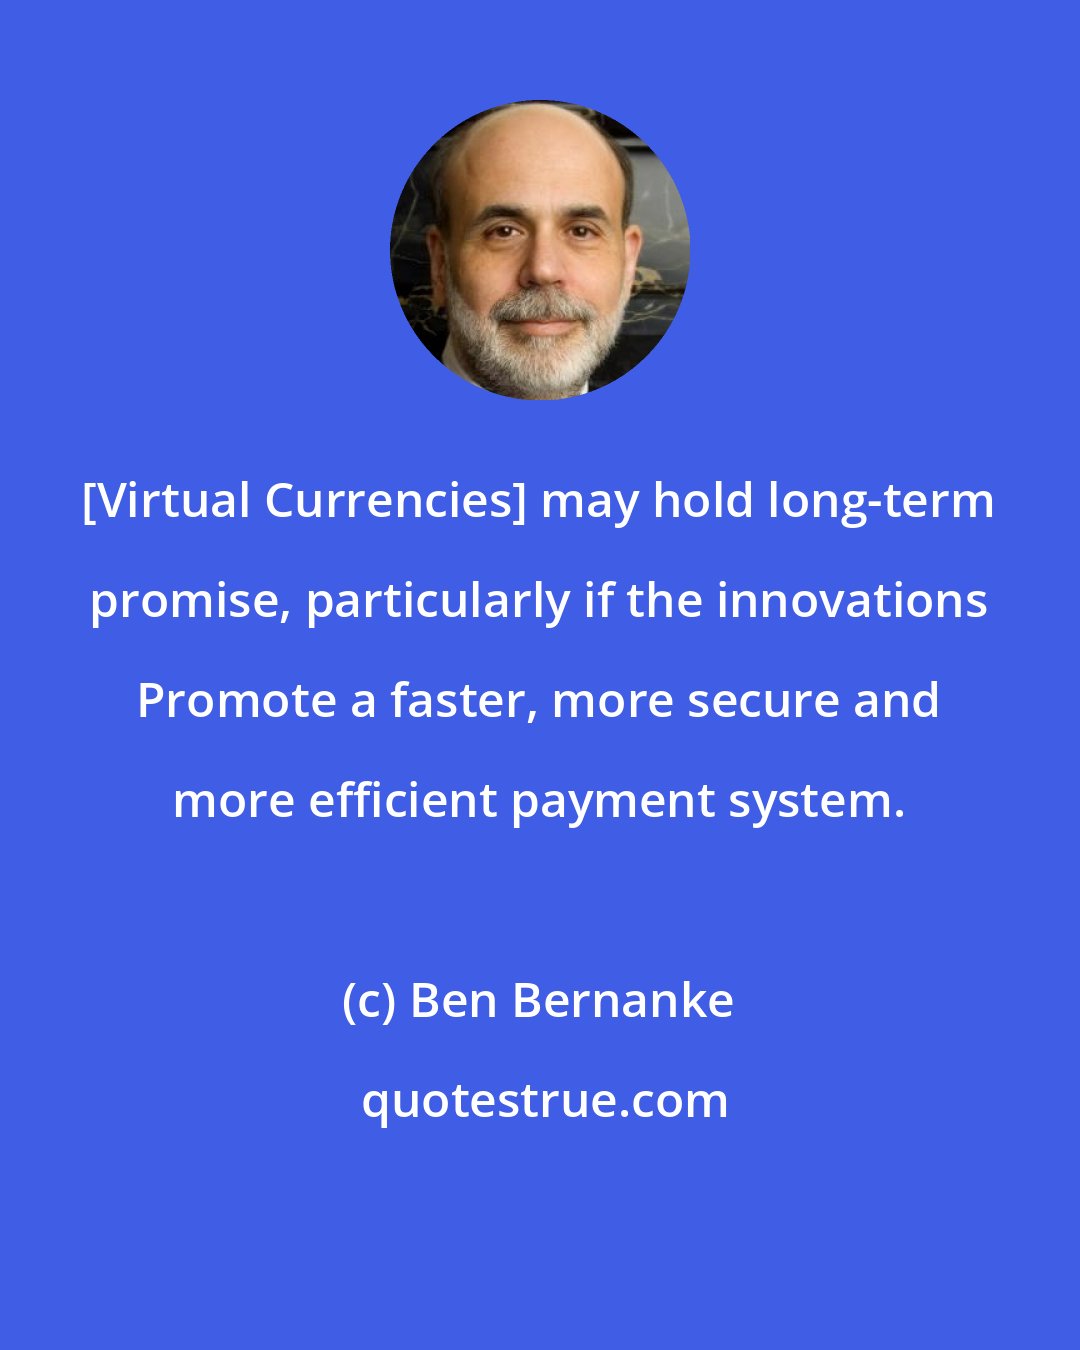 Ben Bernanke: [Virtual Currencies] may hold long-term promise, particularly if the innovations Promote a faster, more secure and more efficient payment system.